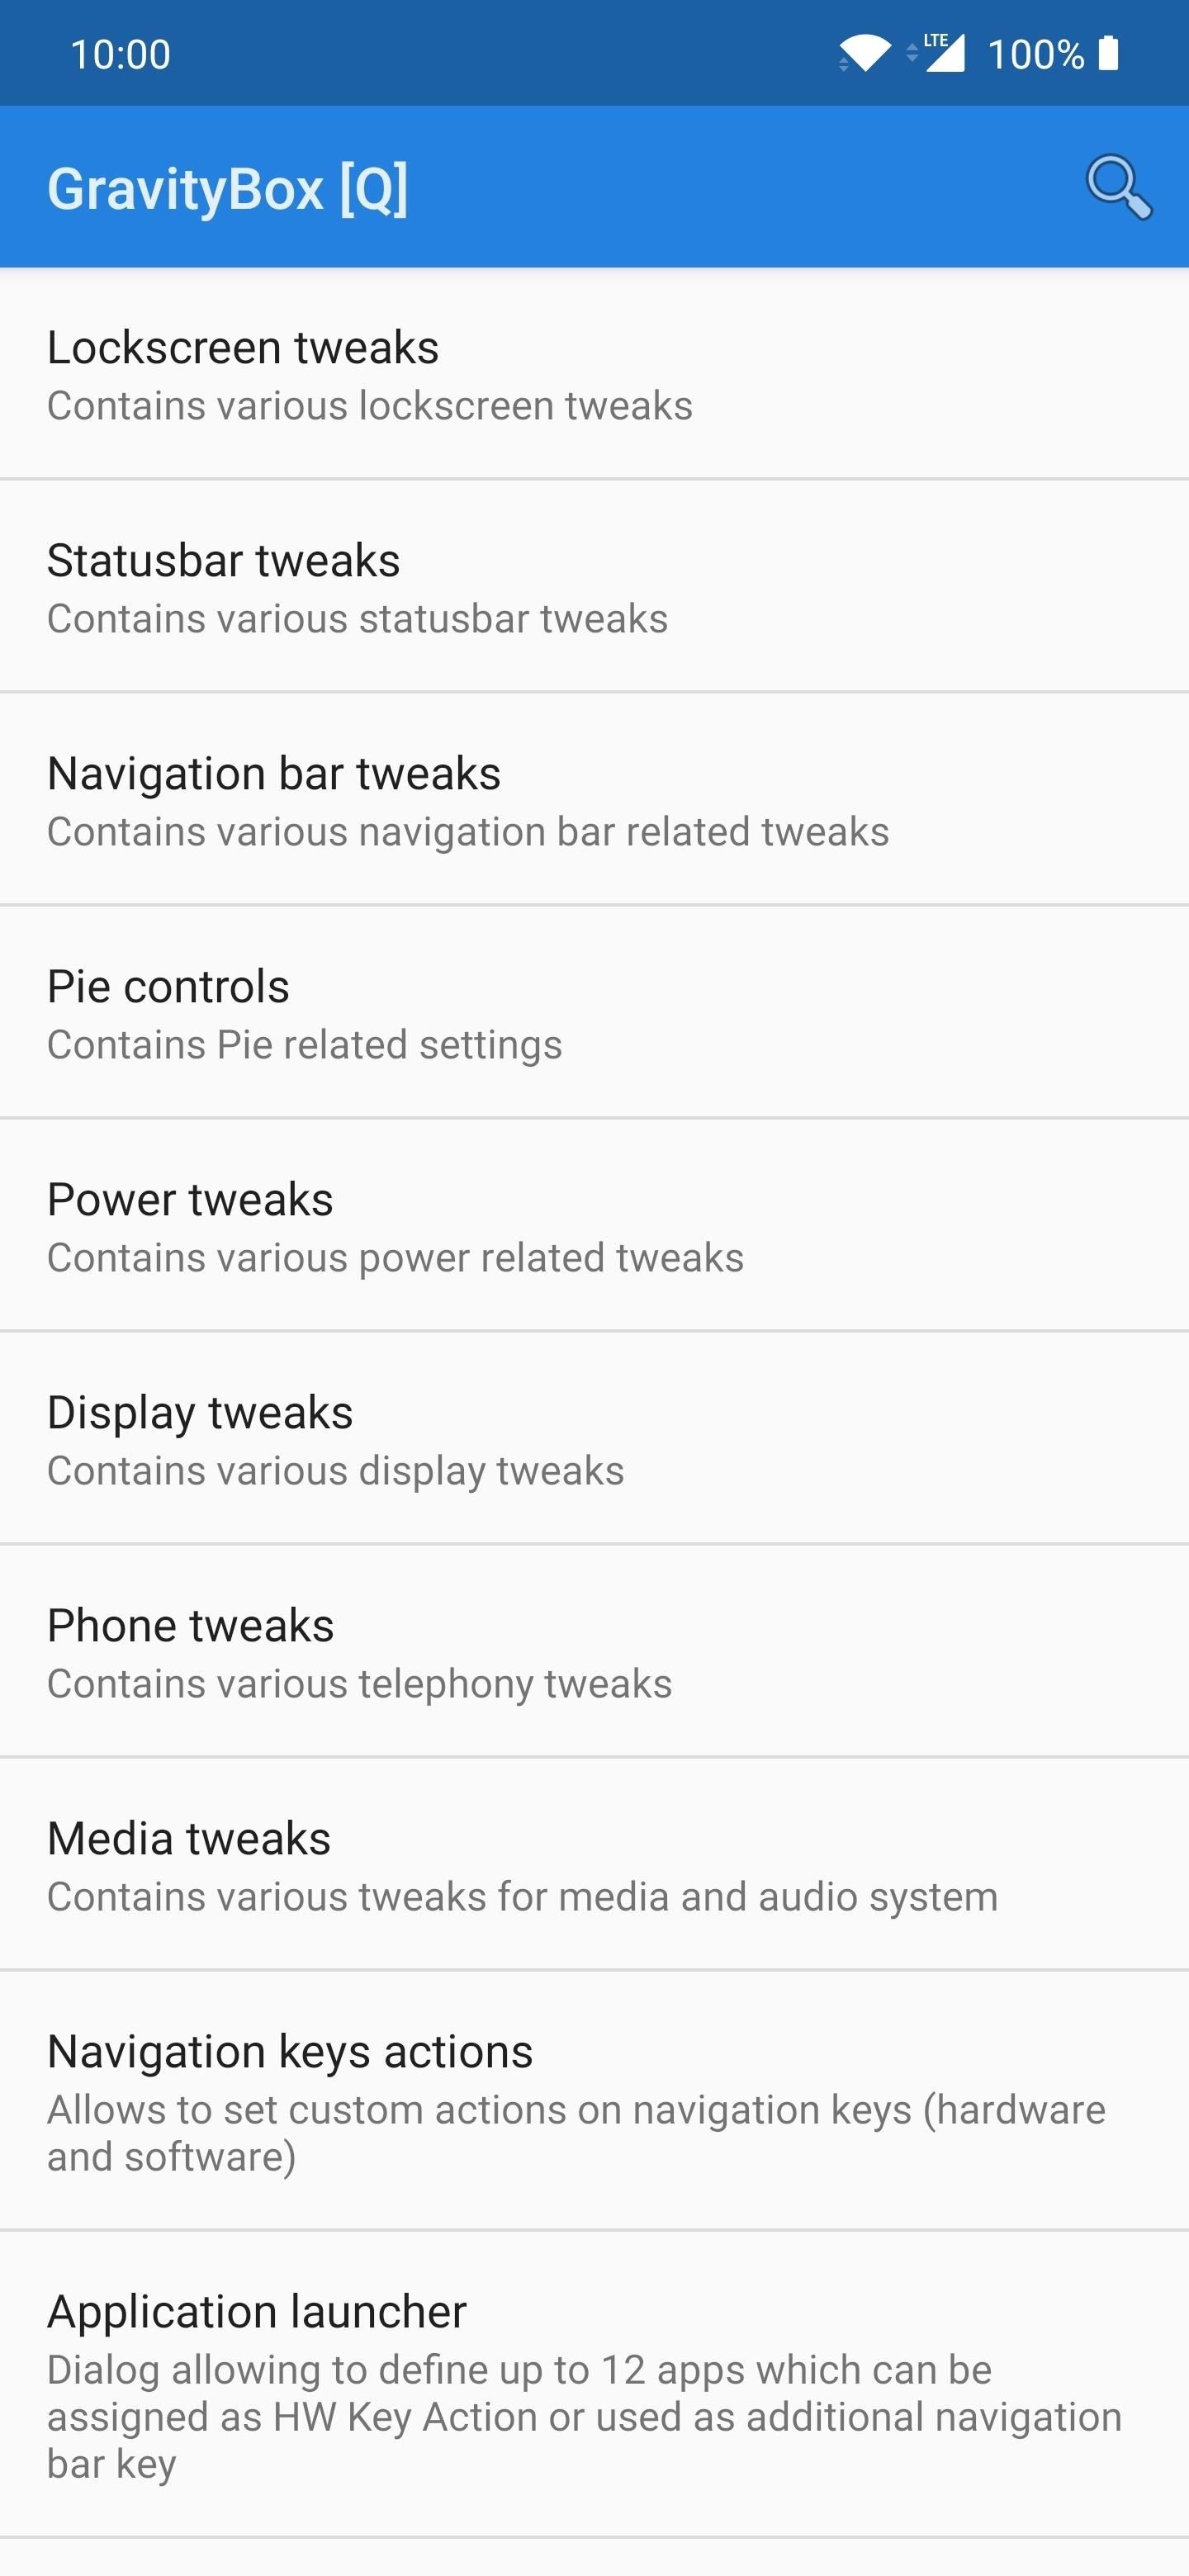 How to Install GravityBox on Android 10 for All the Customization Options You Could Ever Need